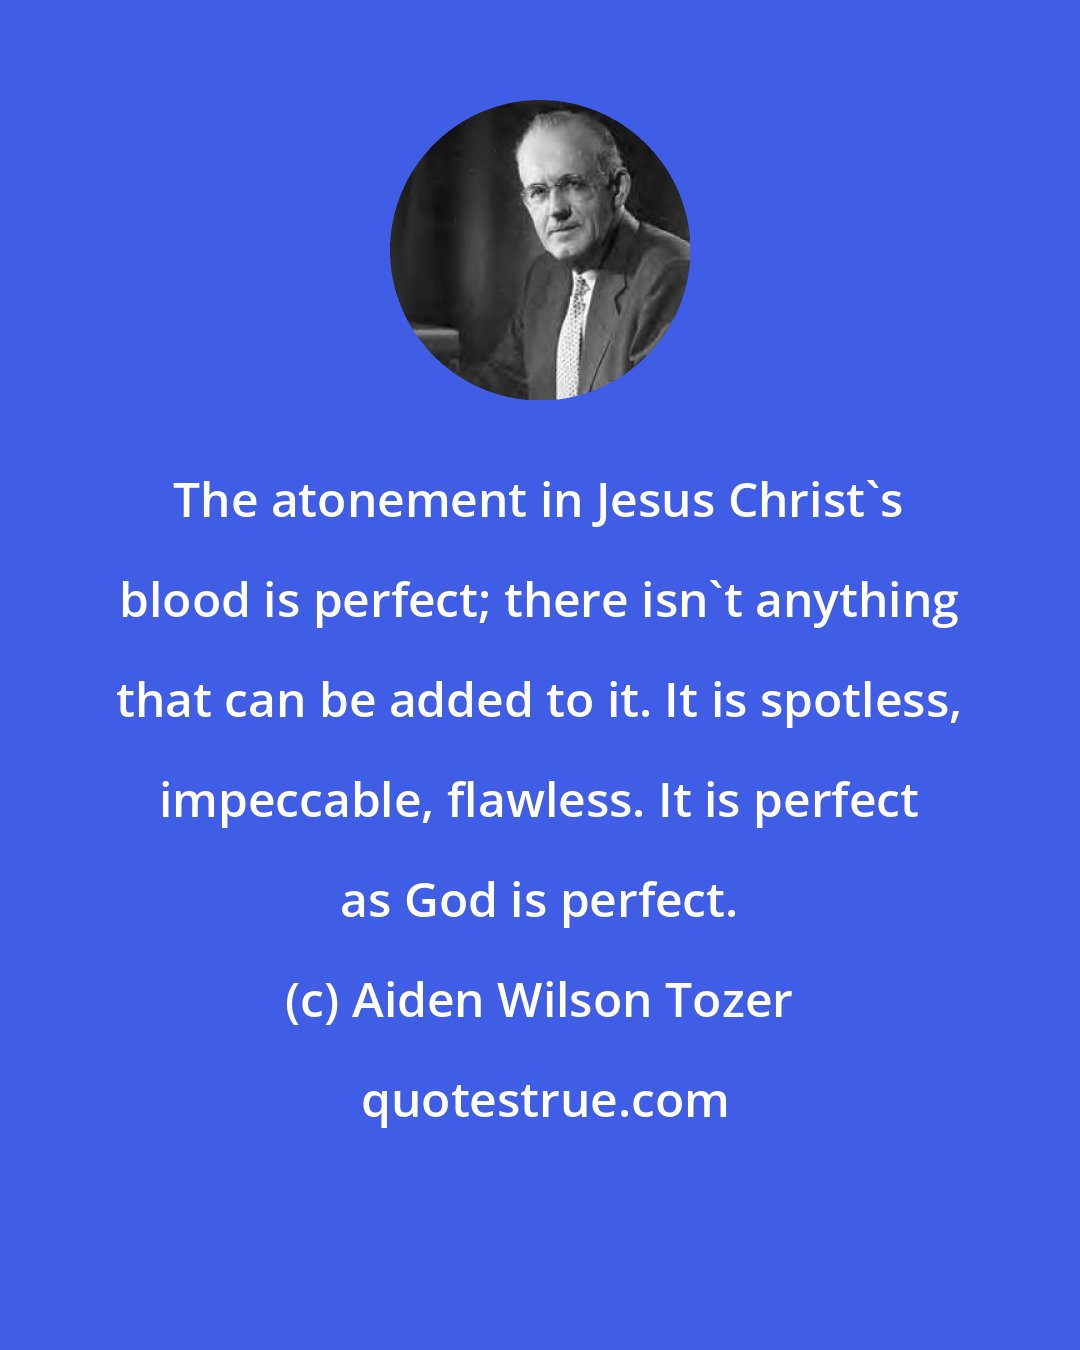 Aiden Wilson Tozer: The atonement in Jesus Christ's blood is perfect; there isn't anything that can be added to it. It is spotless, impeccable, flawless. It is perfect as God is perfect.